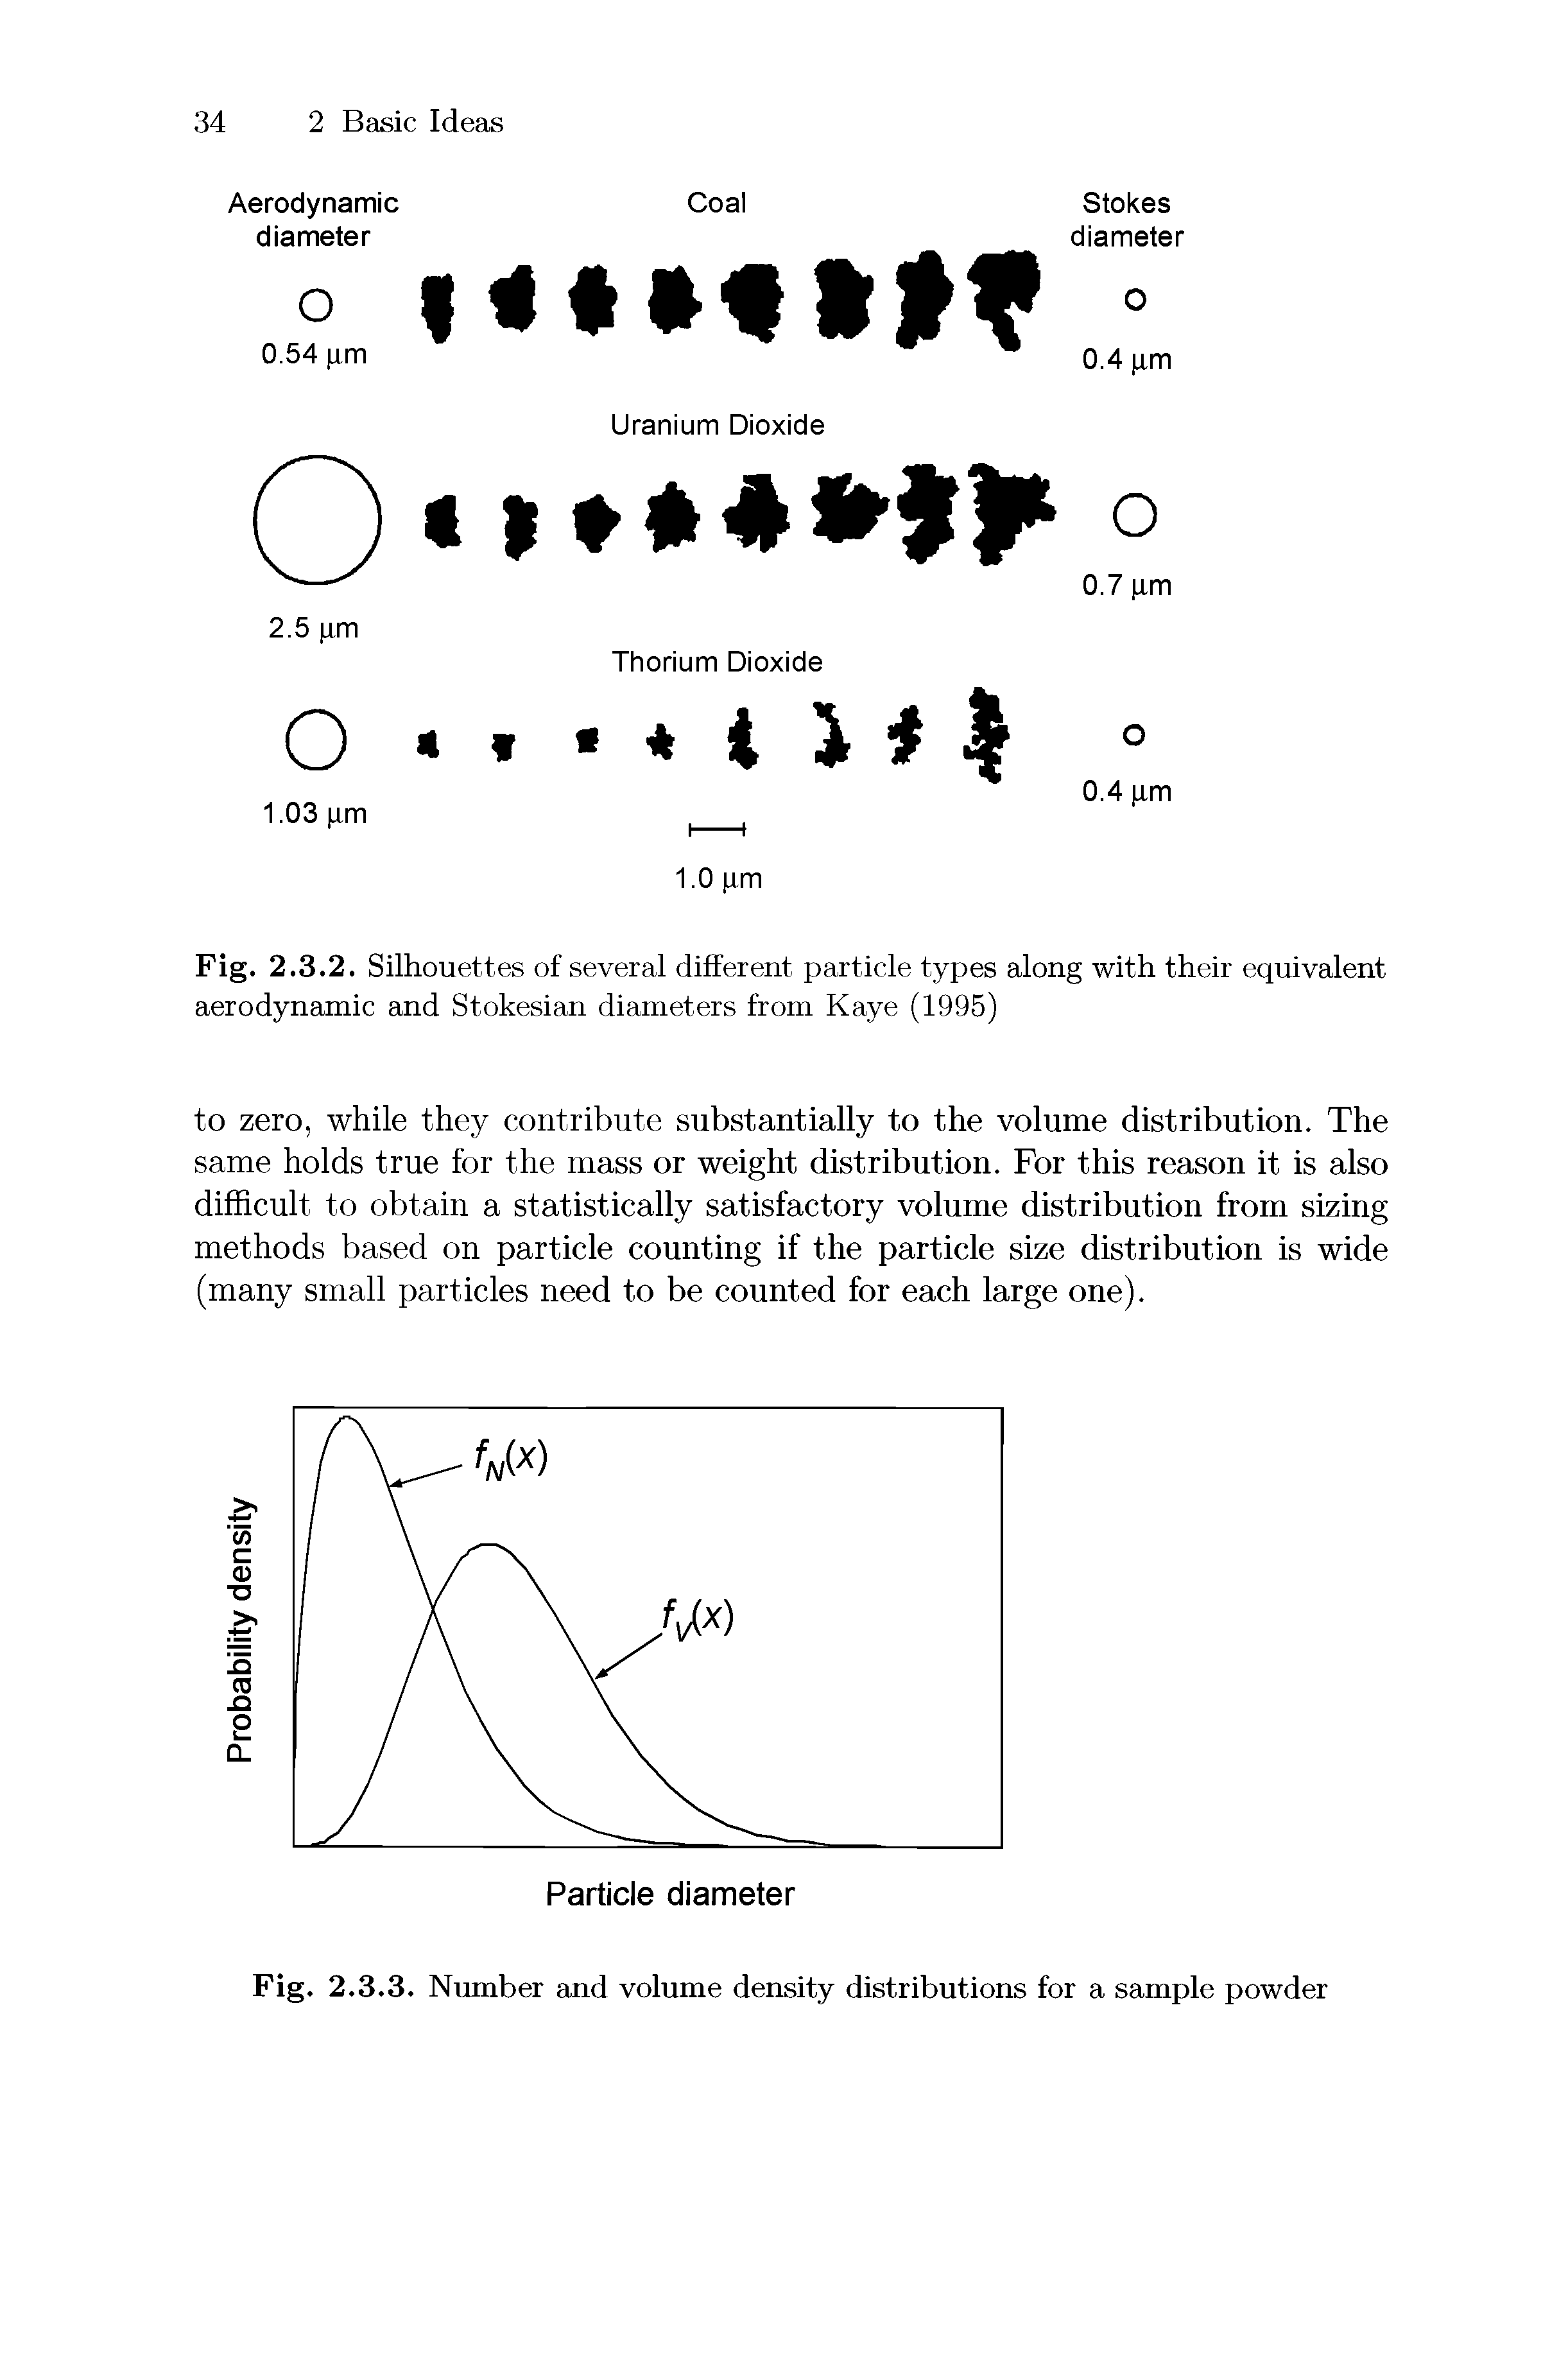 Fig. 2.3.2. Silhouettes of several different particle types along with their equivalent aerodynamic and Stokesian diameters from Kaye (1995)...